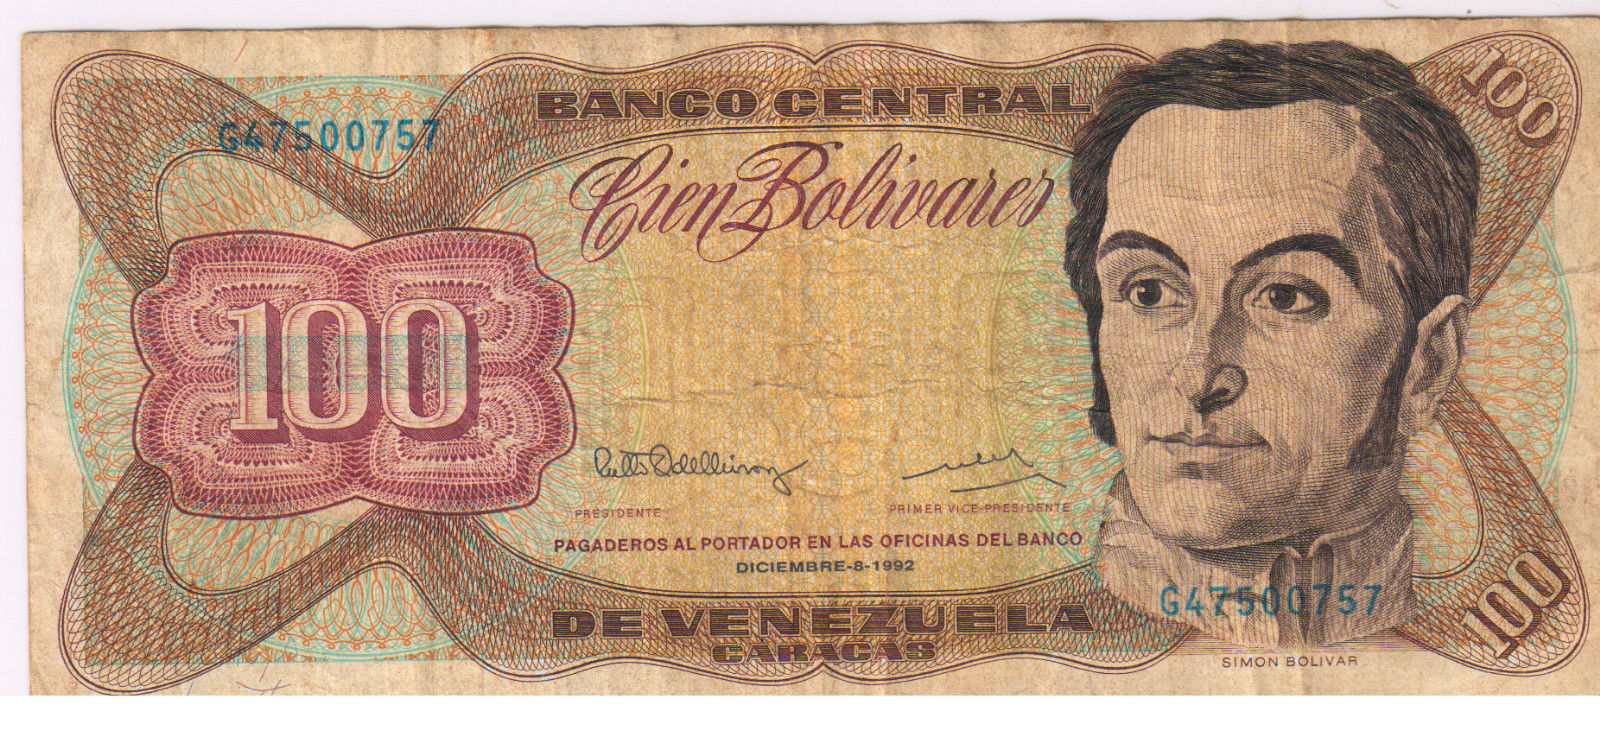 Venezuela 100 bolivars 1992 used currency note KB Coins & Currencies